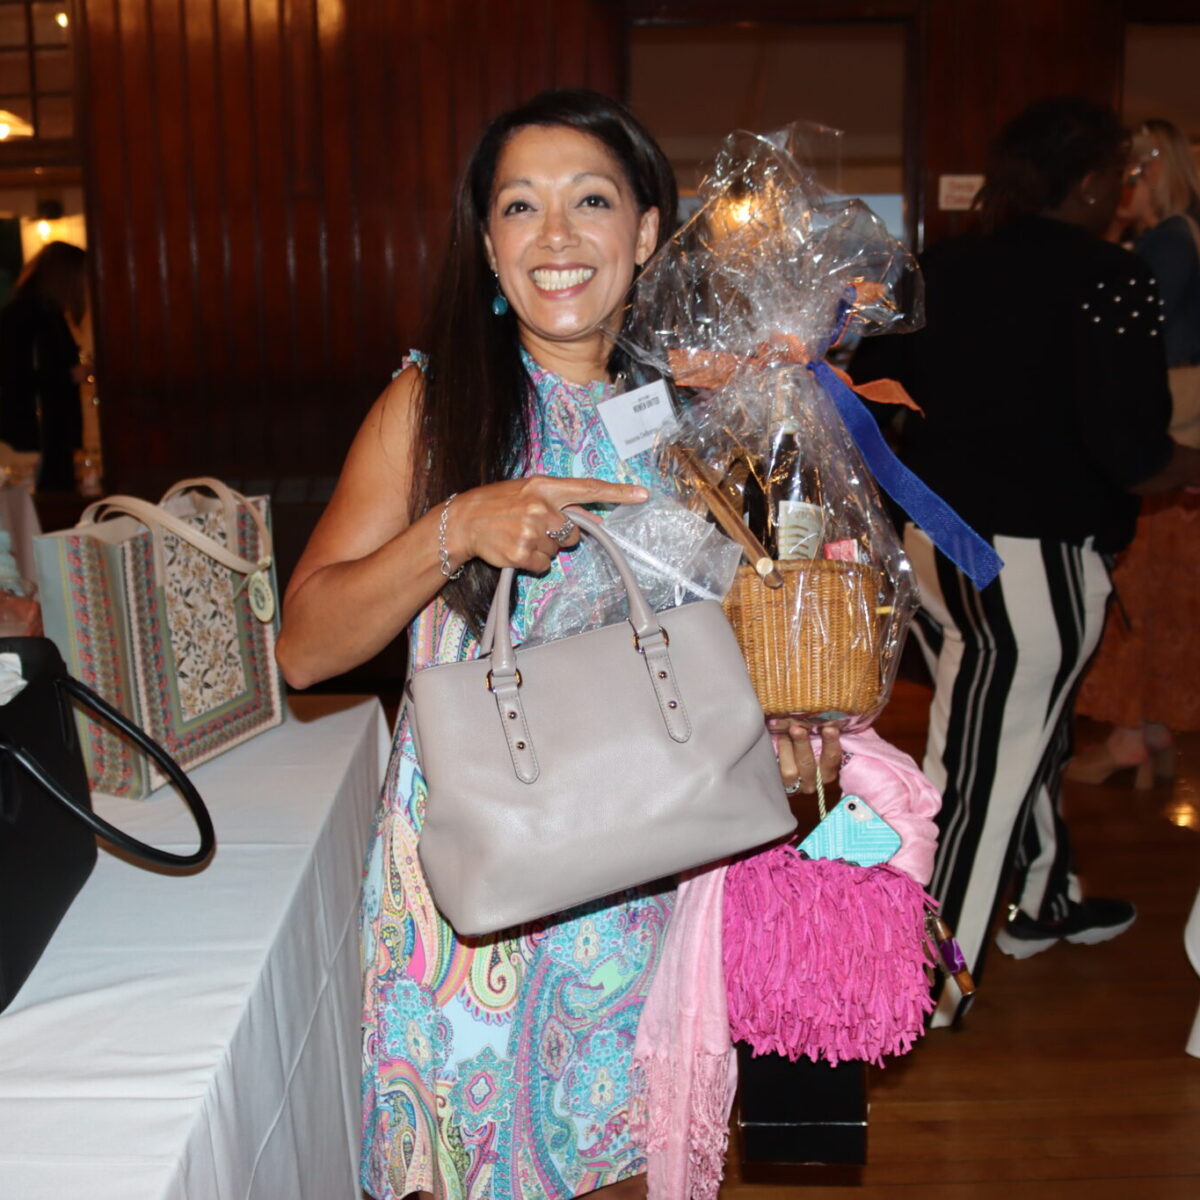 An attendee poses with a purse and a raffle prize.